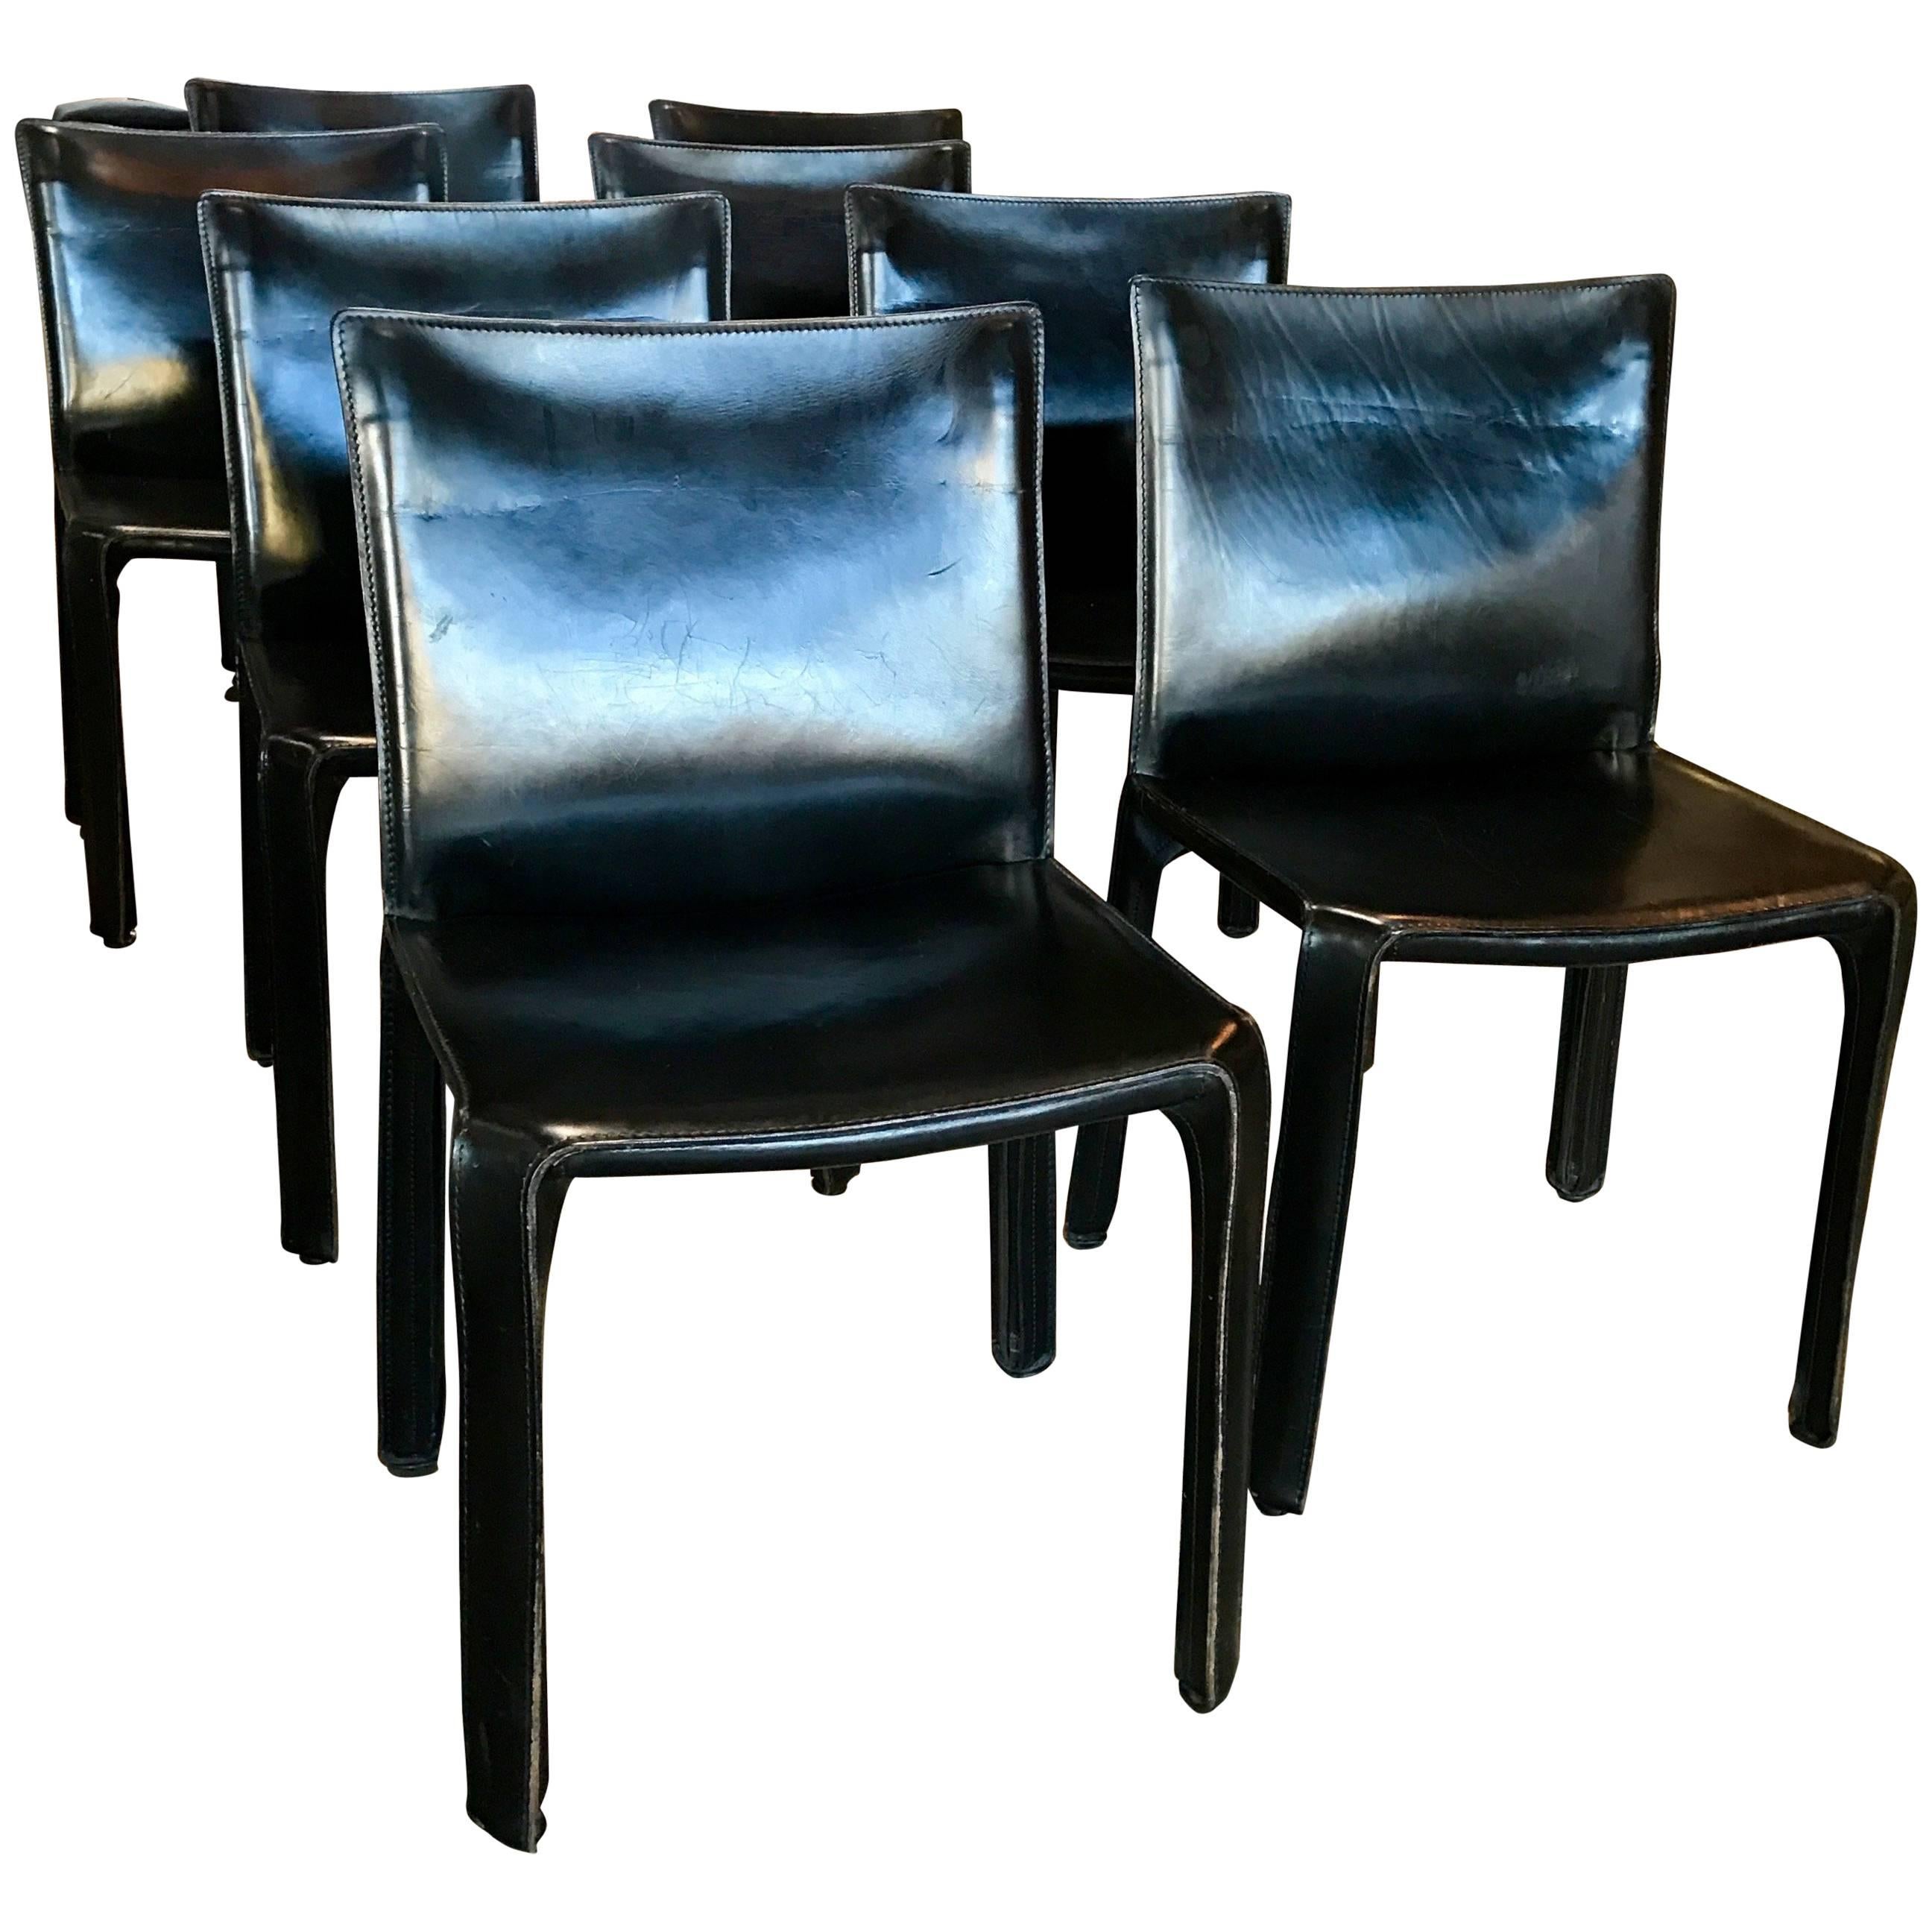 Cassina Chairs, Model Cab Nr. 412, Mario Bellini in Black Leather, Set of Eight